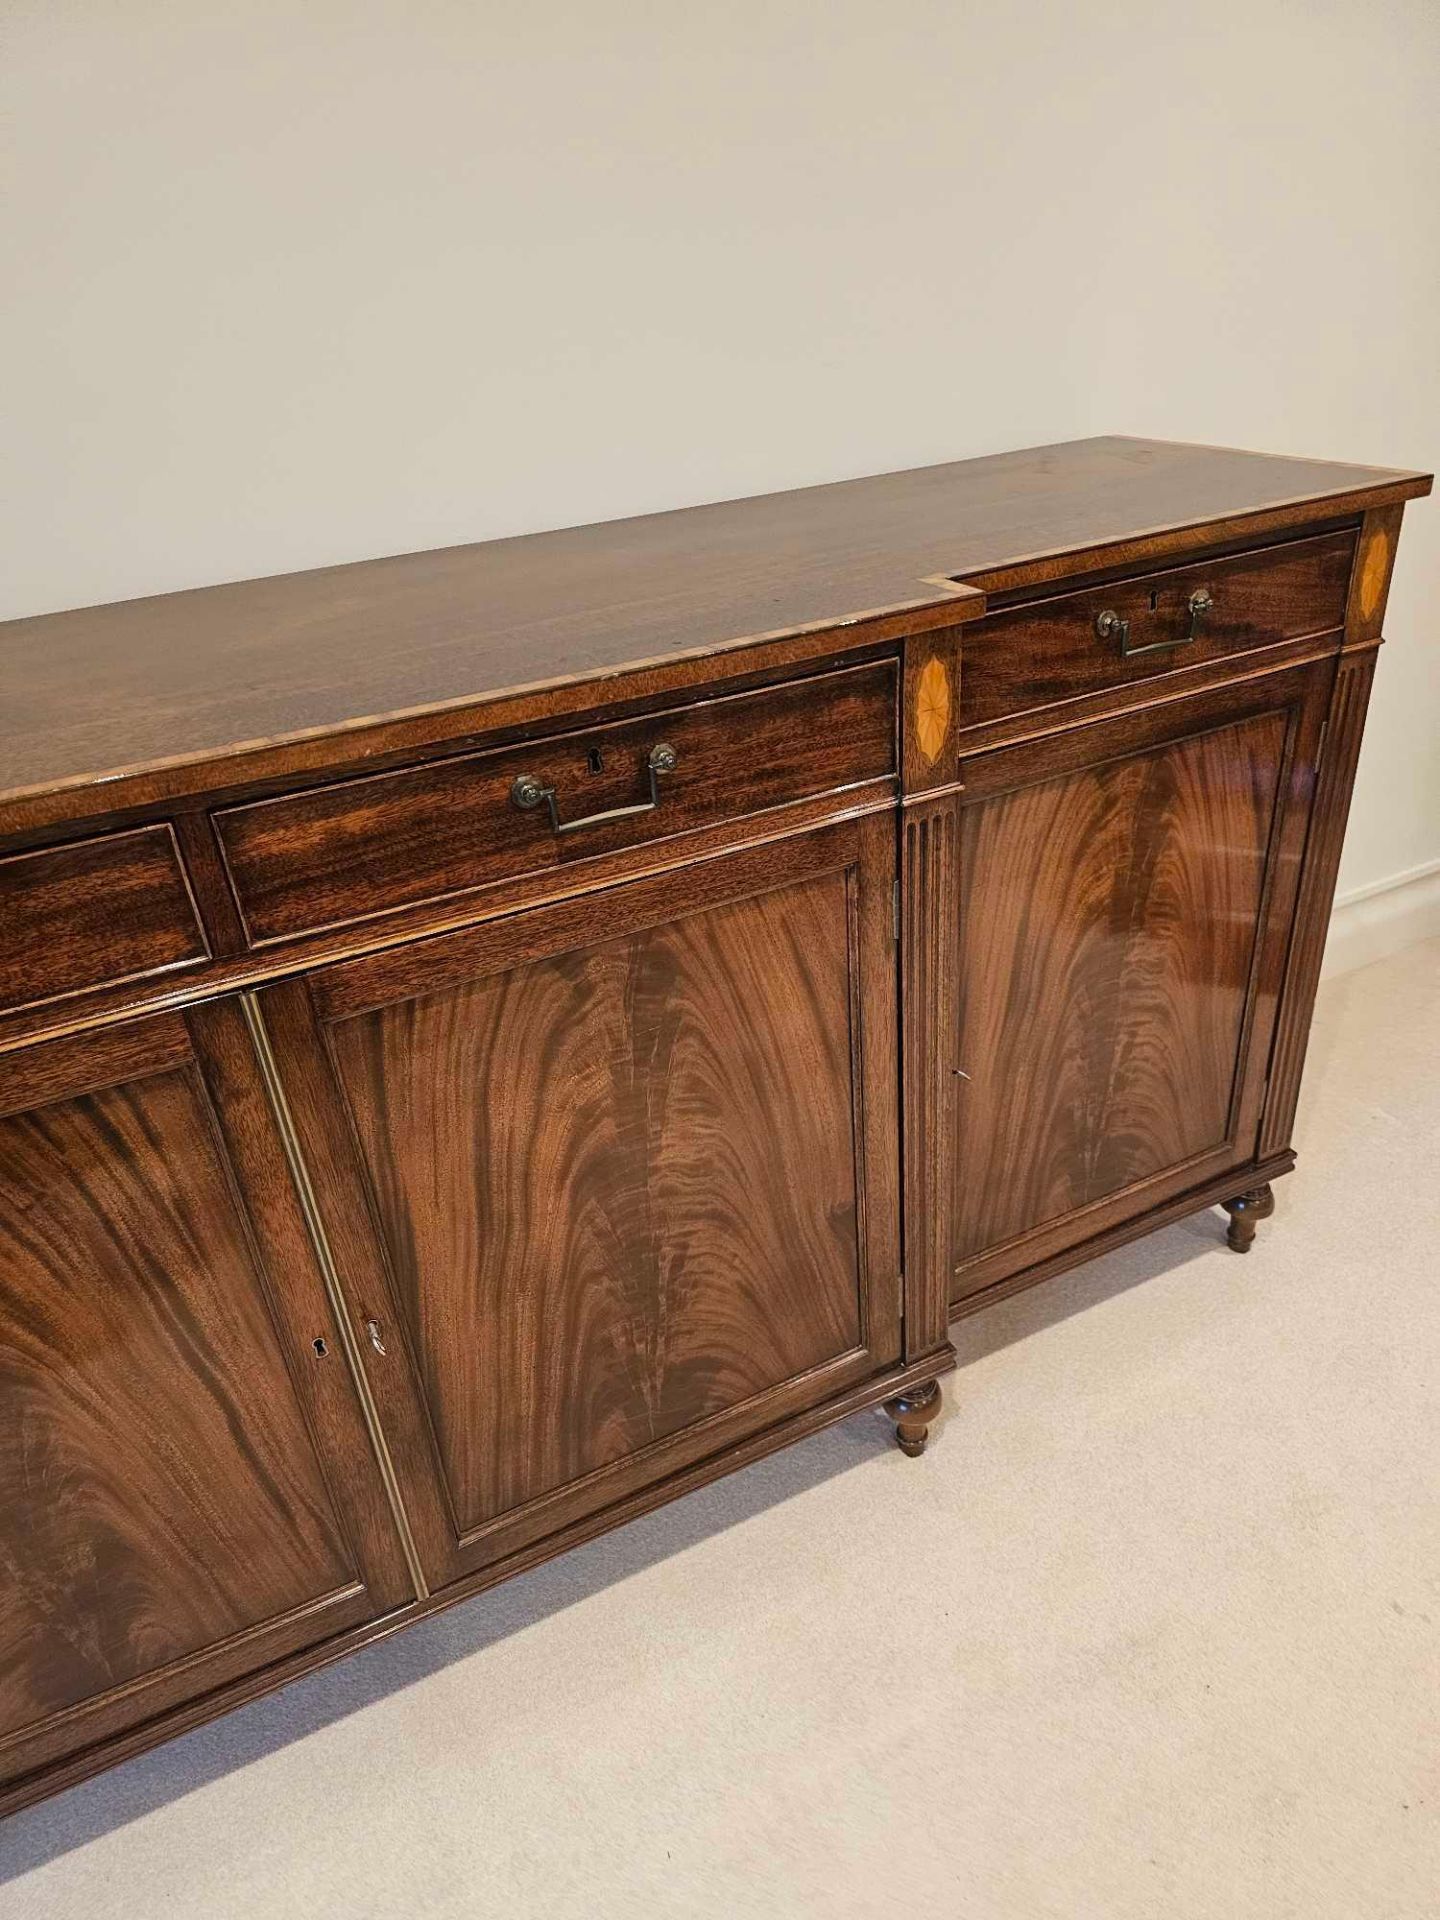 William Tillman George III Style Flame Mahogany Crossbanded In Satinwood Sideboard The Shaped Top - Image 5 of 9